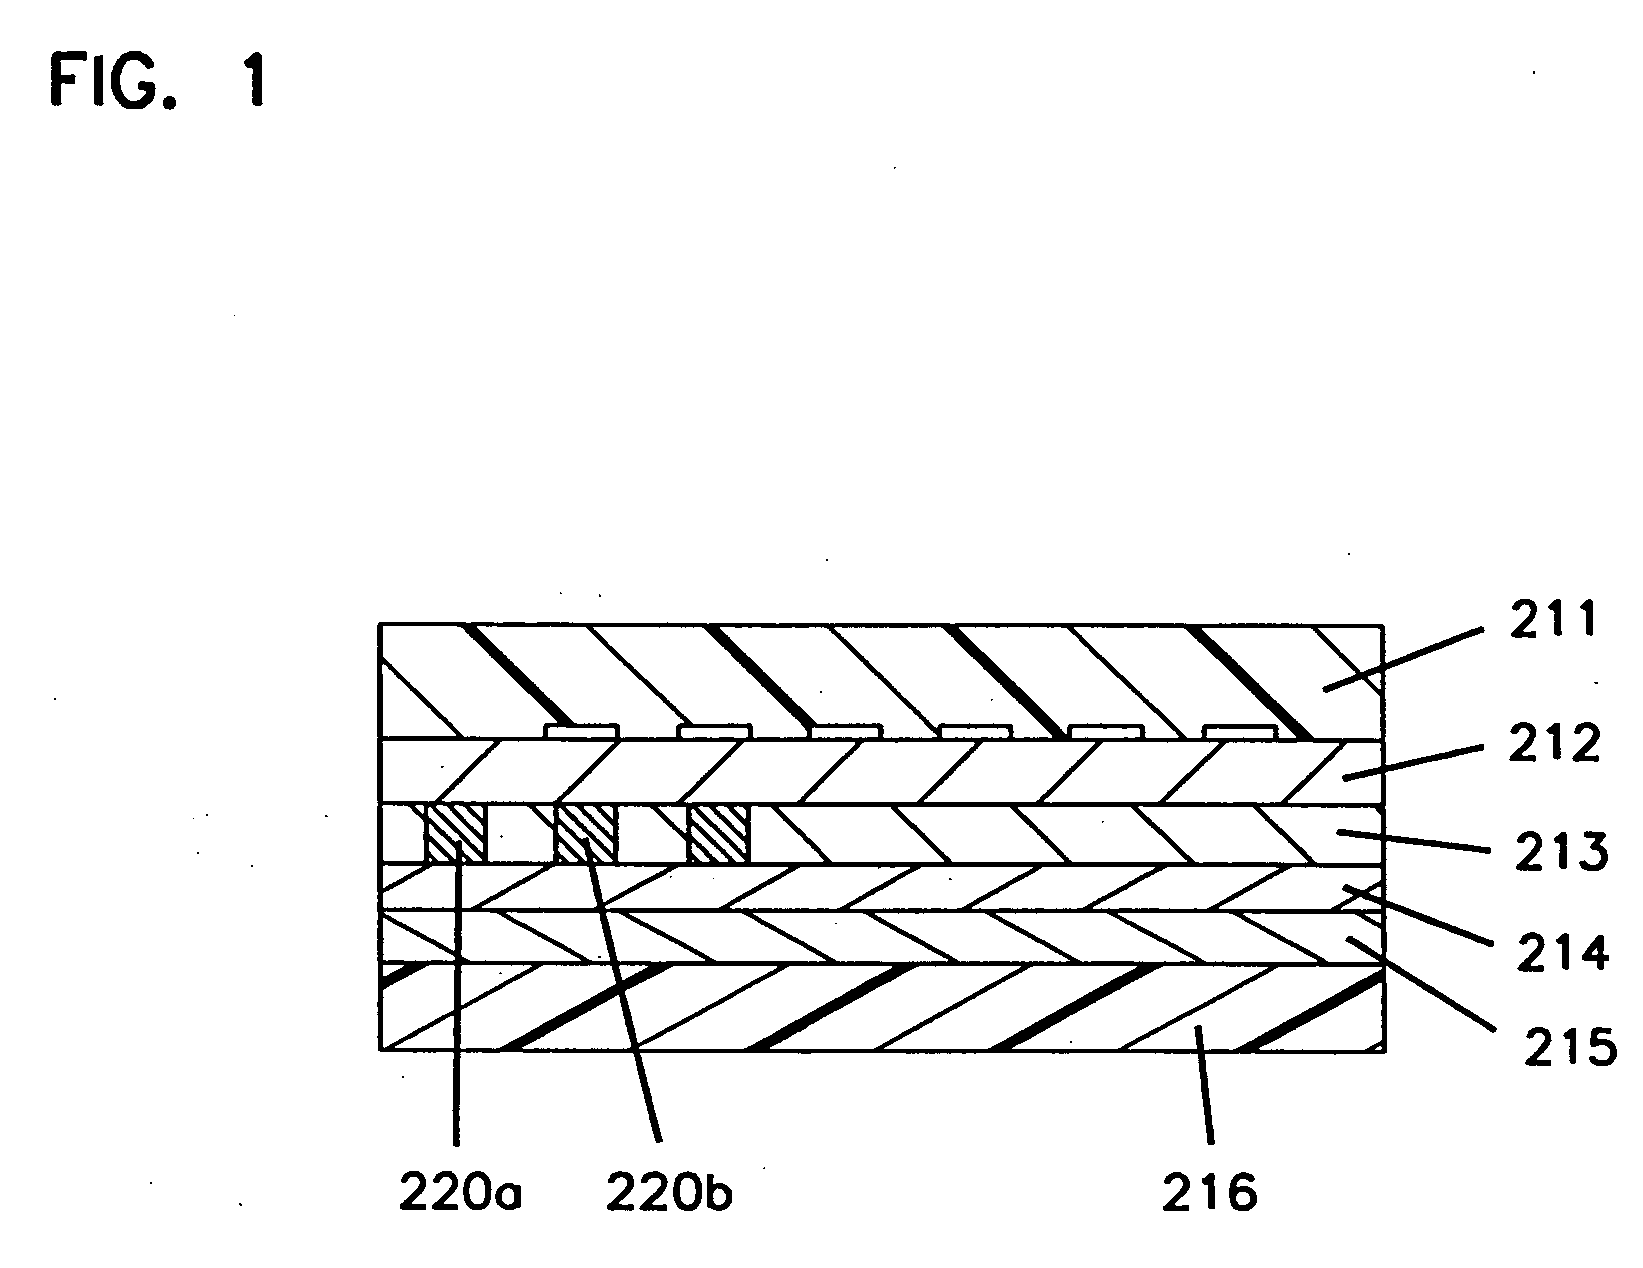 Optical disk, method for recording and reproducing write-once information on and from optical disk, otpical disk reproducing device, optical disk recording and reproducing device, device for recording write-once information on optical disk, and optical disk recording device